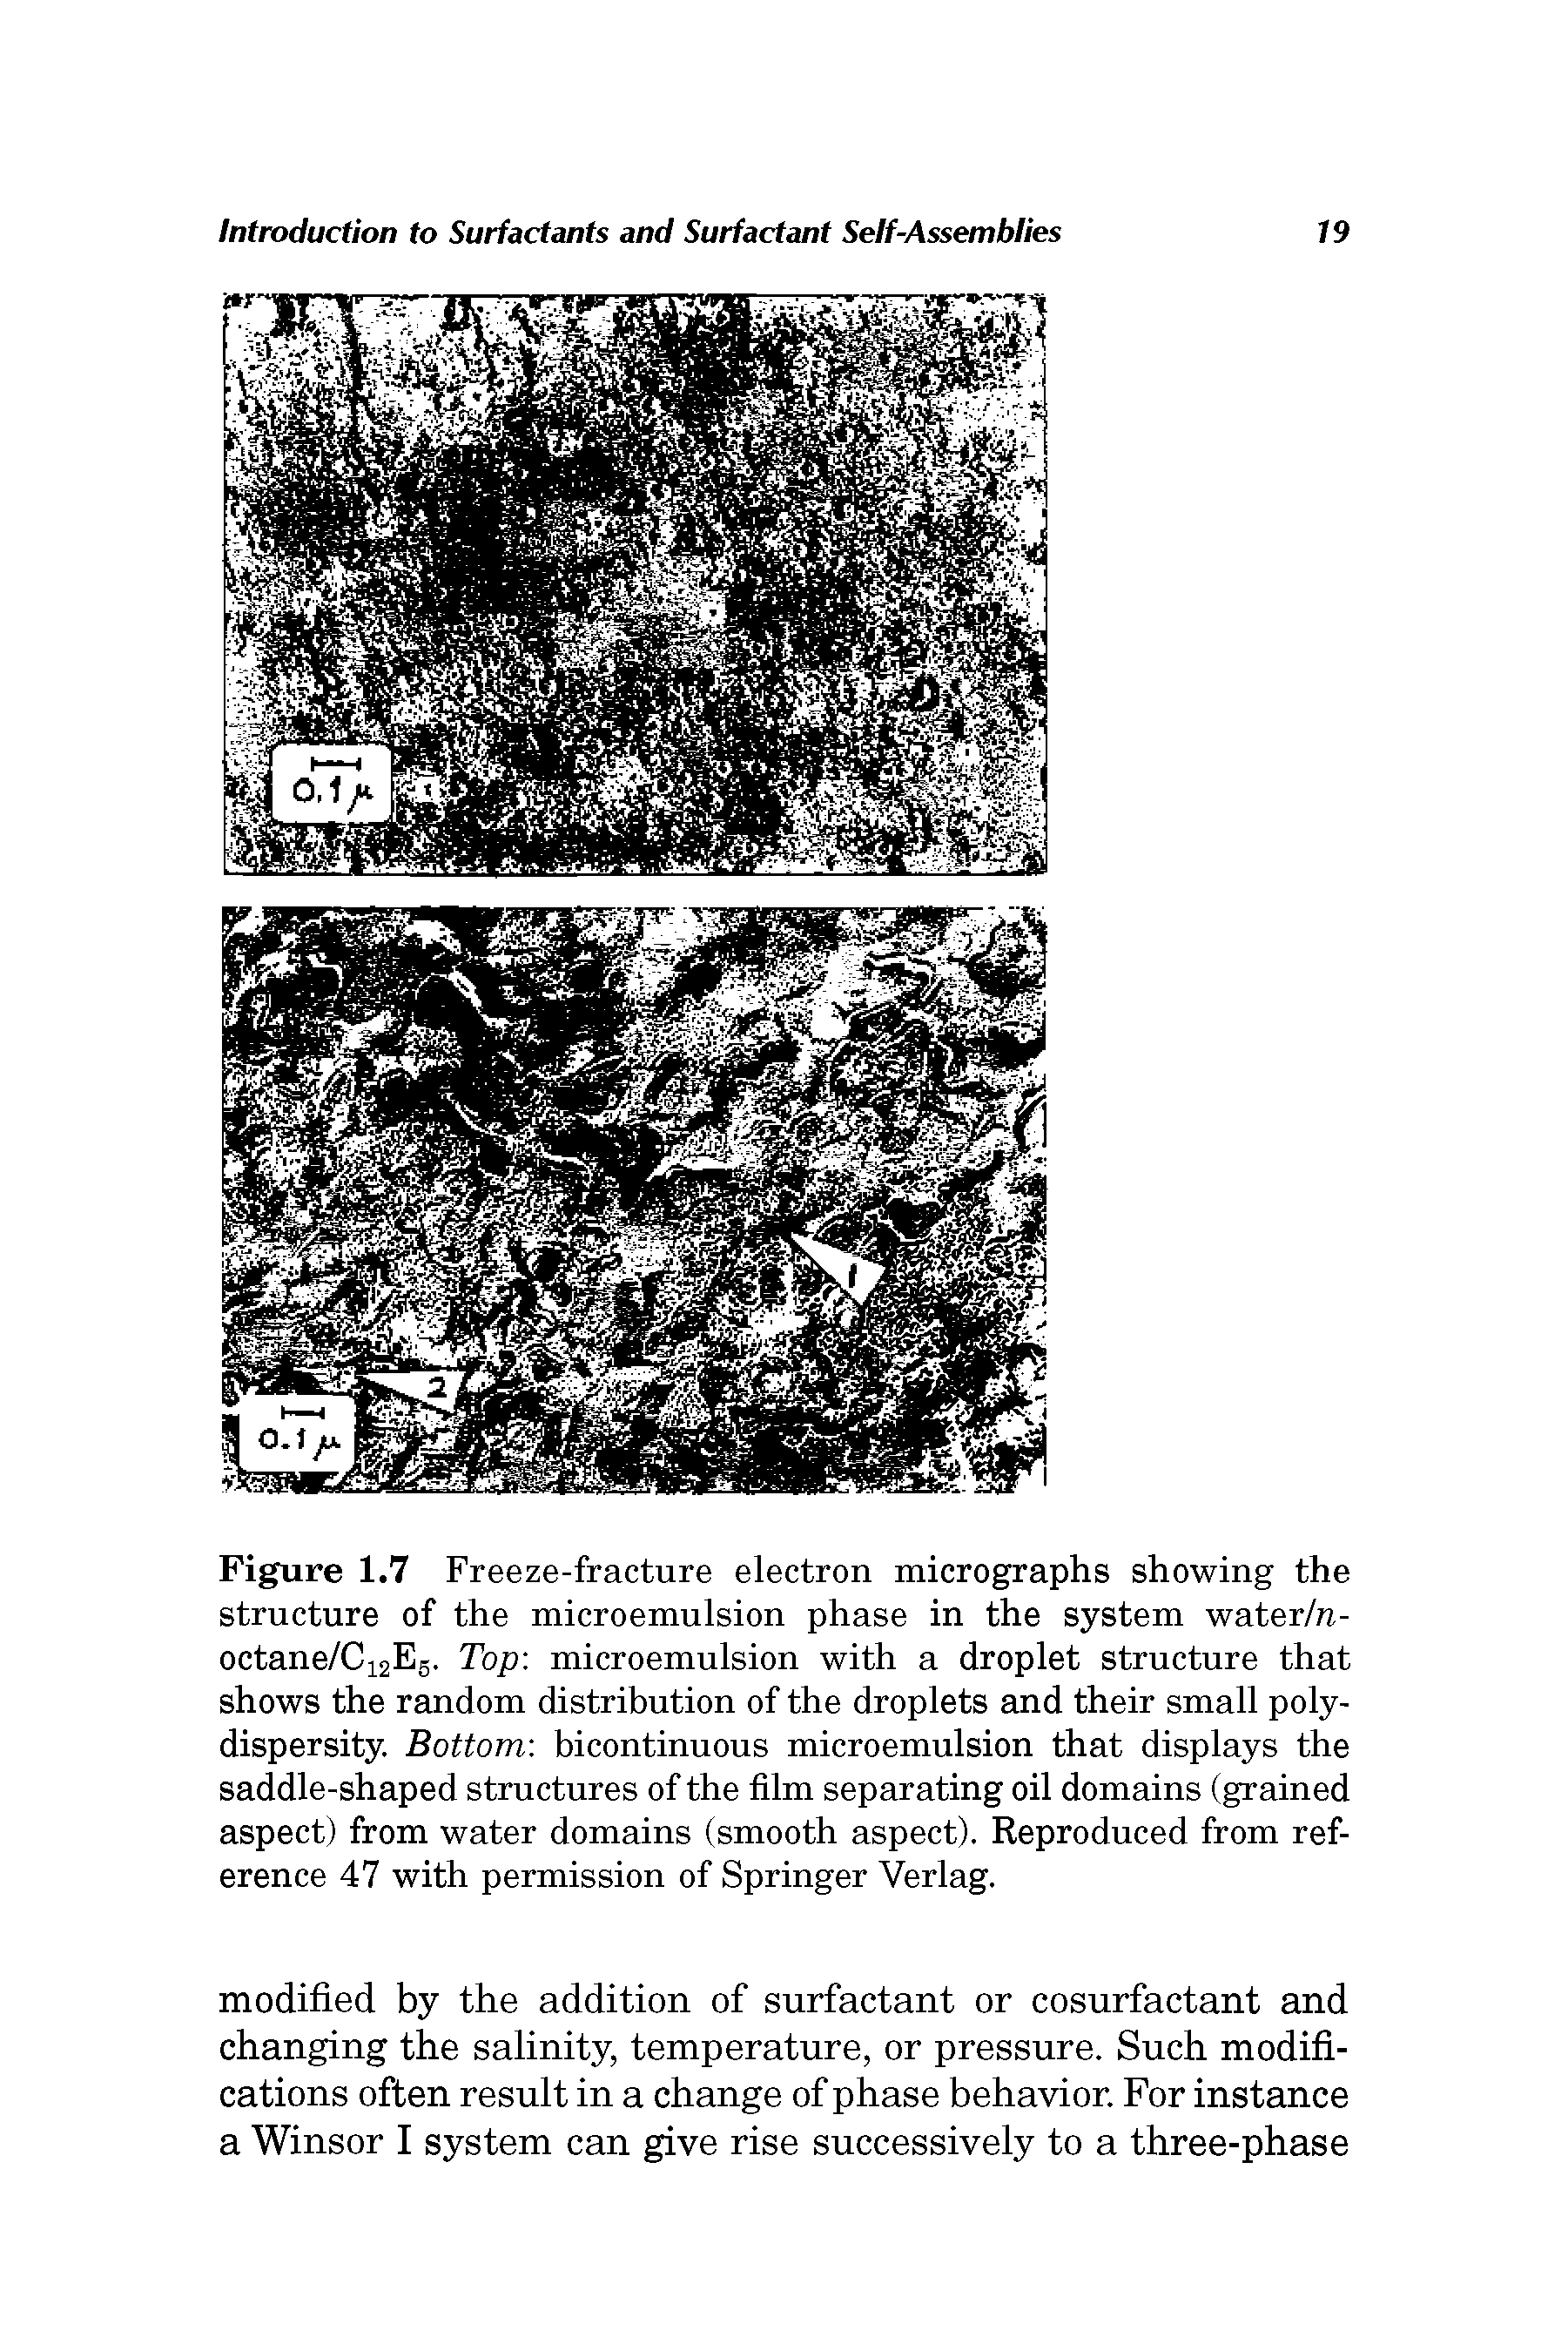 Figure 1.7 Freeze-fracture electron micrographs showing the structure of the microemulsion phase in the system water/n-octane/Ci2E5. Top microemulsion with a droplet structure that shows the random distribution of the droplets and their small poly-dispersity. Bottom bicontinuous microemulsion that displays the saddle-shaped structures of the film separating oil domains (grained aspect) from water domains (smooth aspect). Reproduced from reference 47 with permission of Springer Verlag.